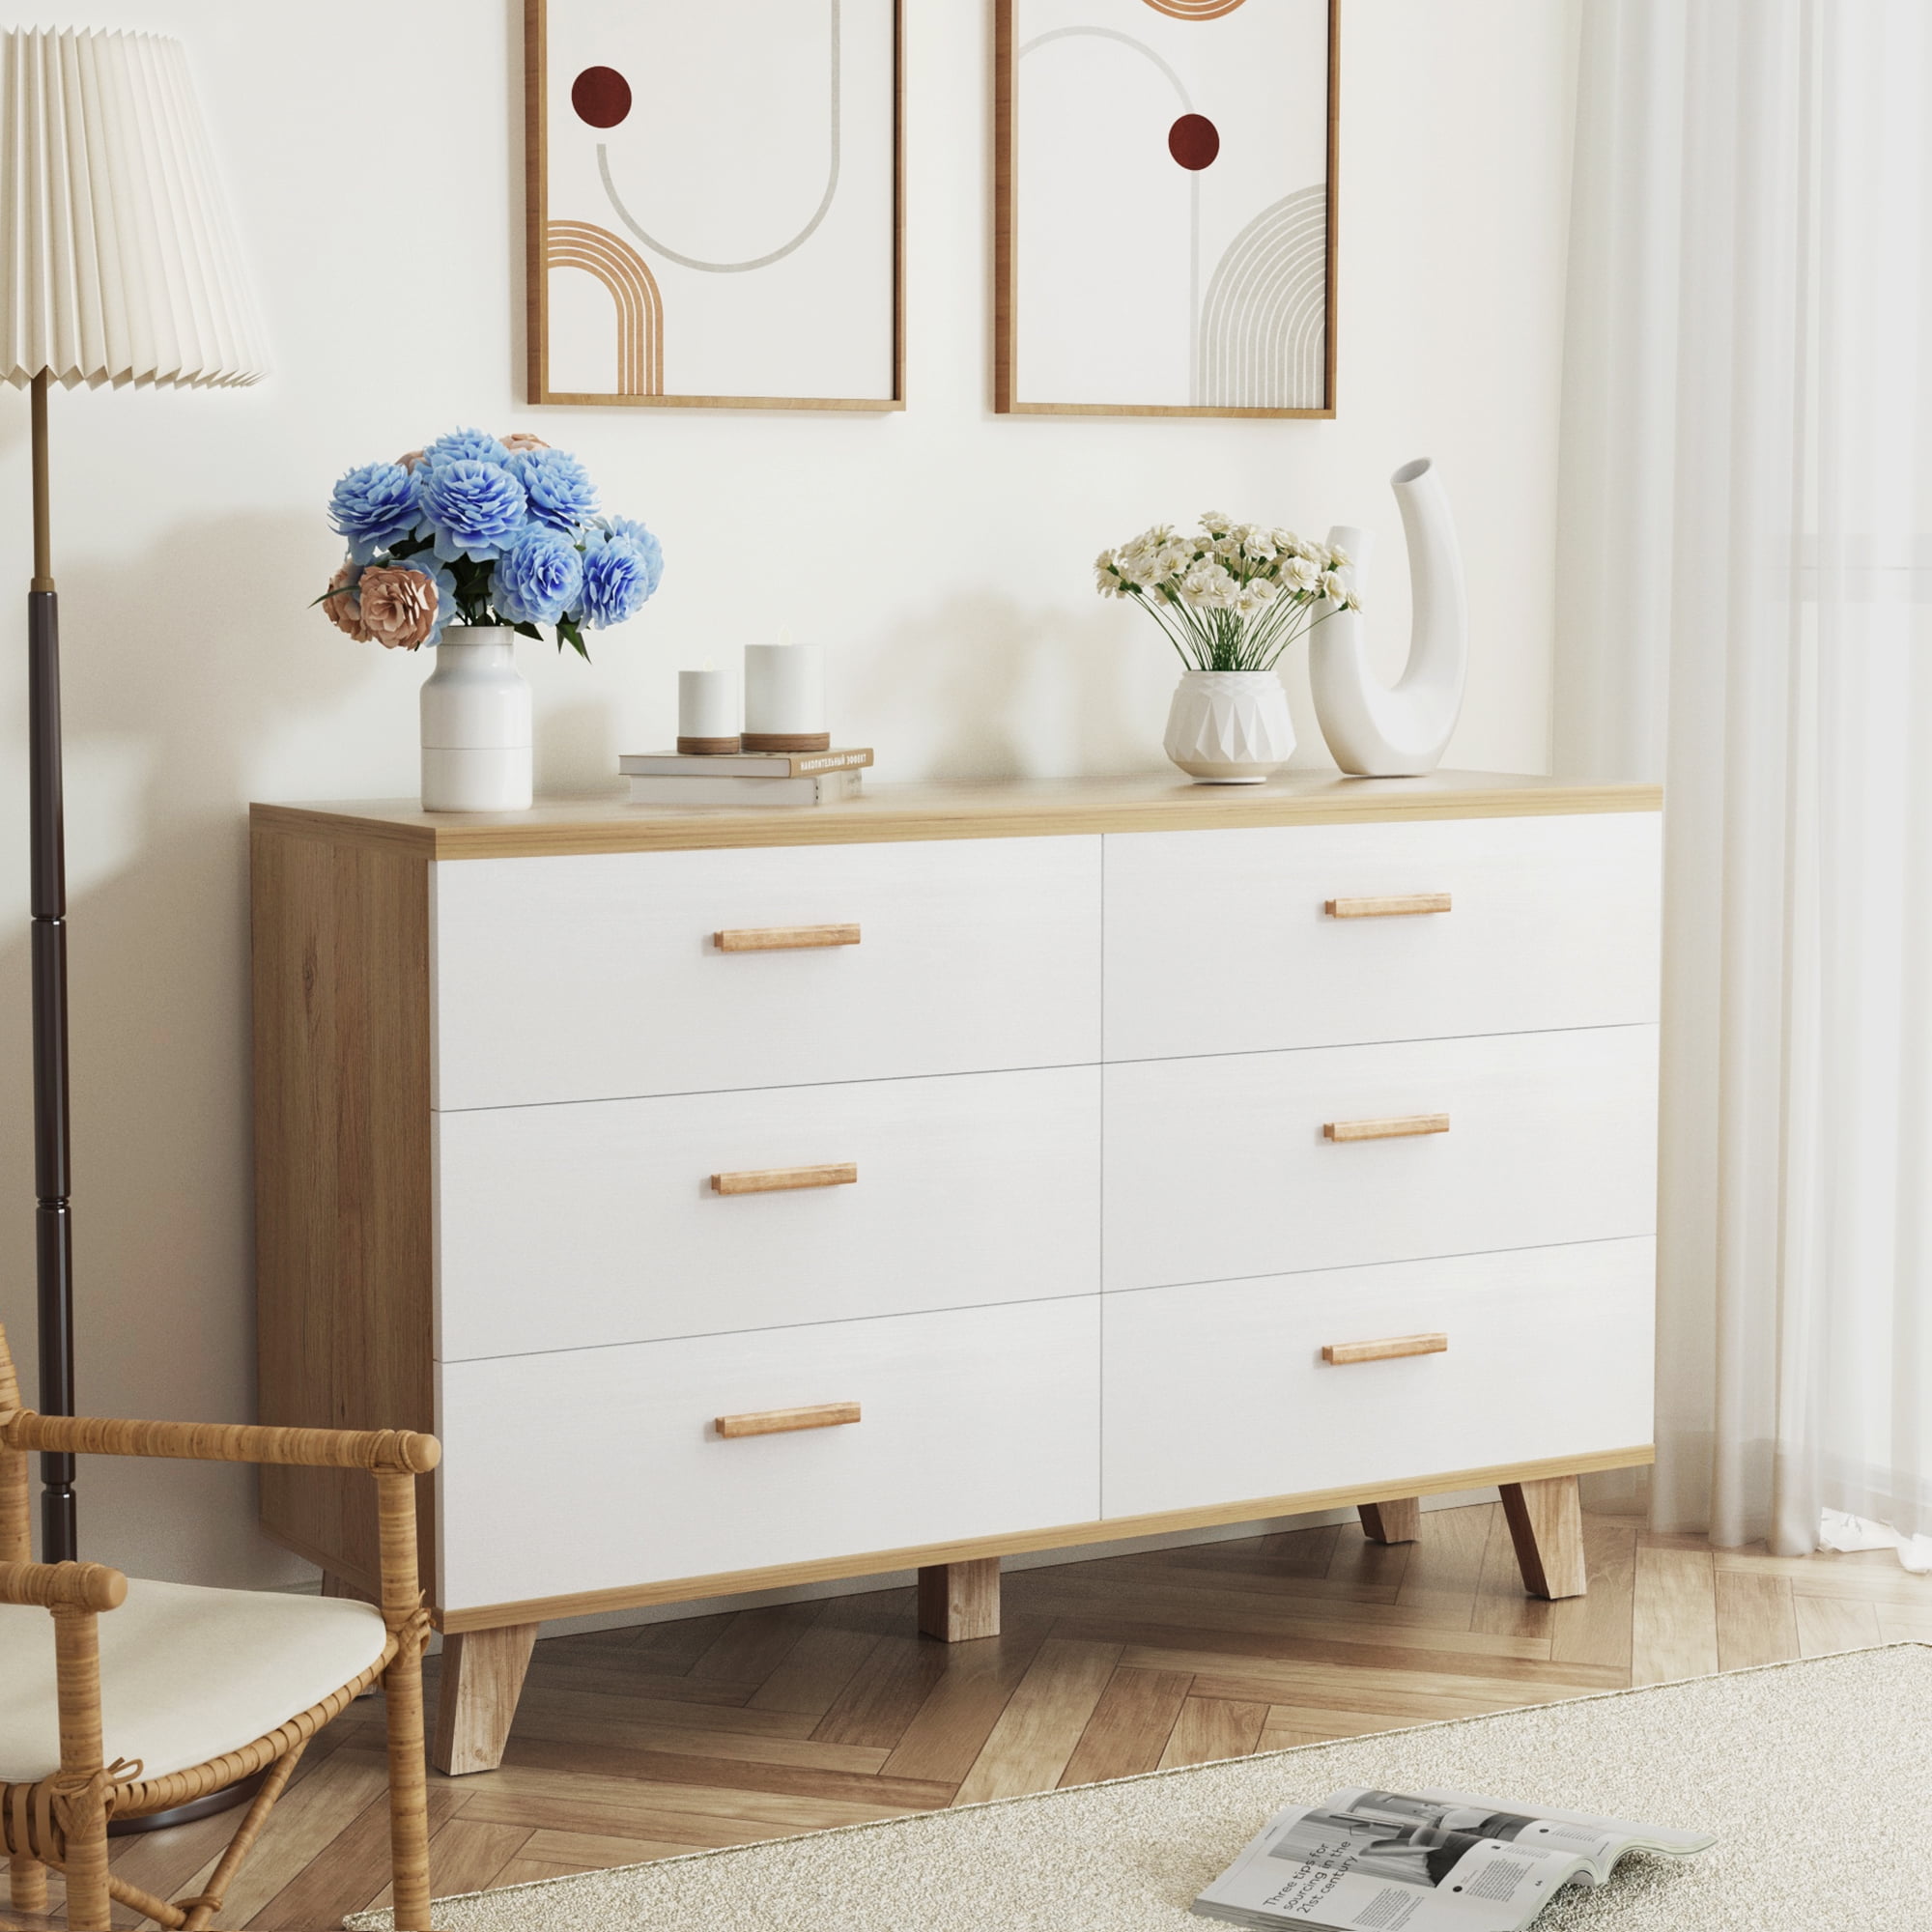 EYIW Modern 5 Drawers Wood Dresser with Solid Wood Handles, Foot